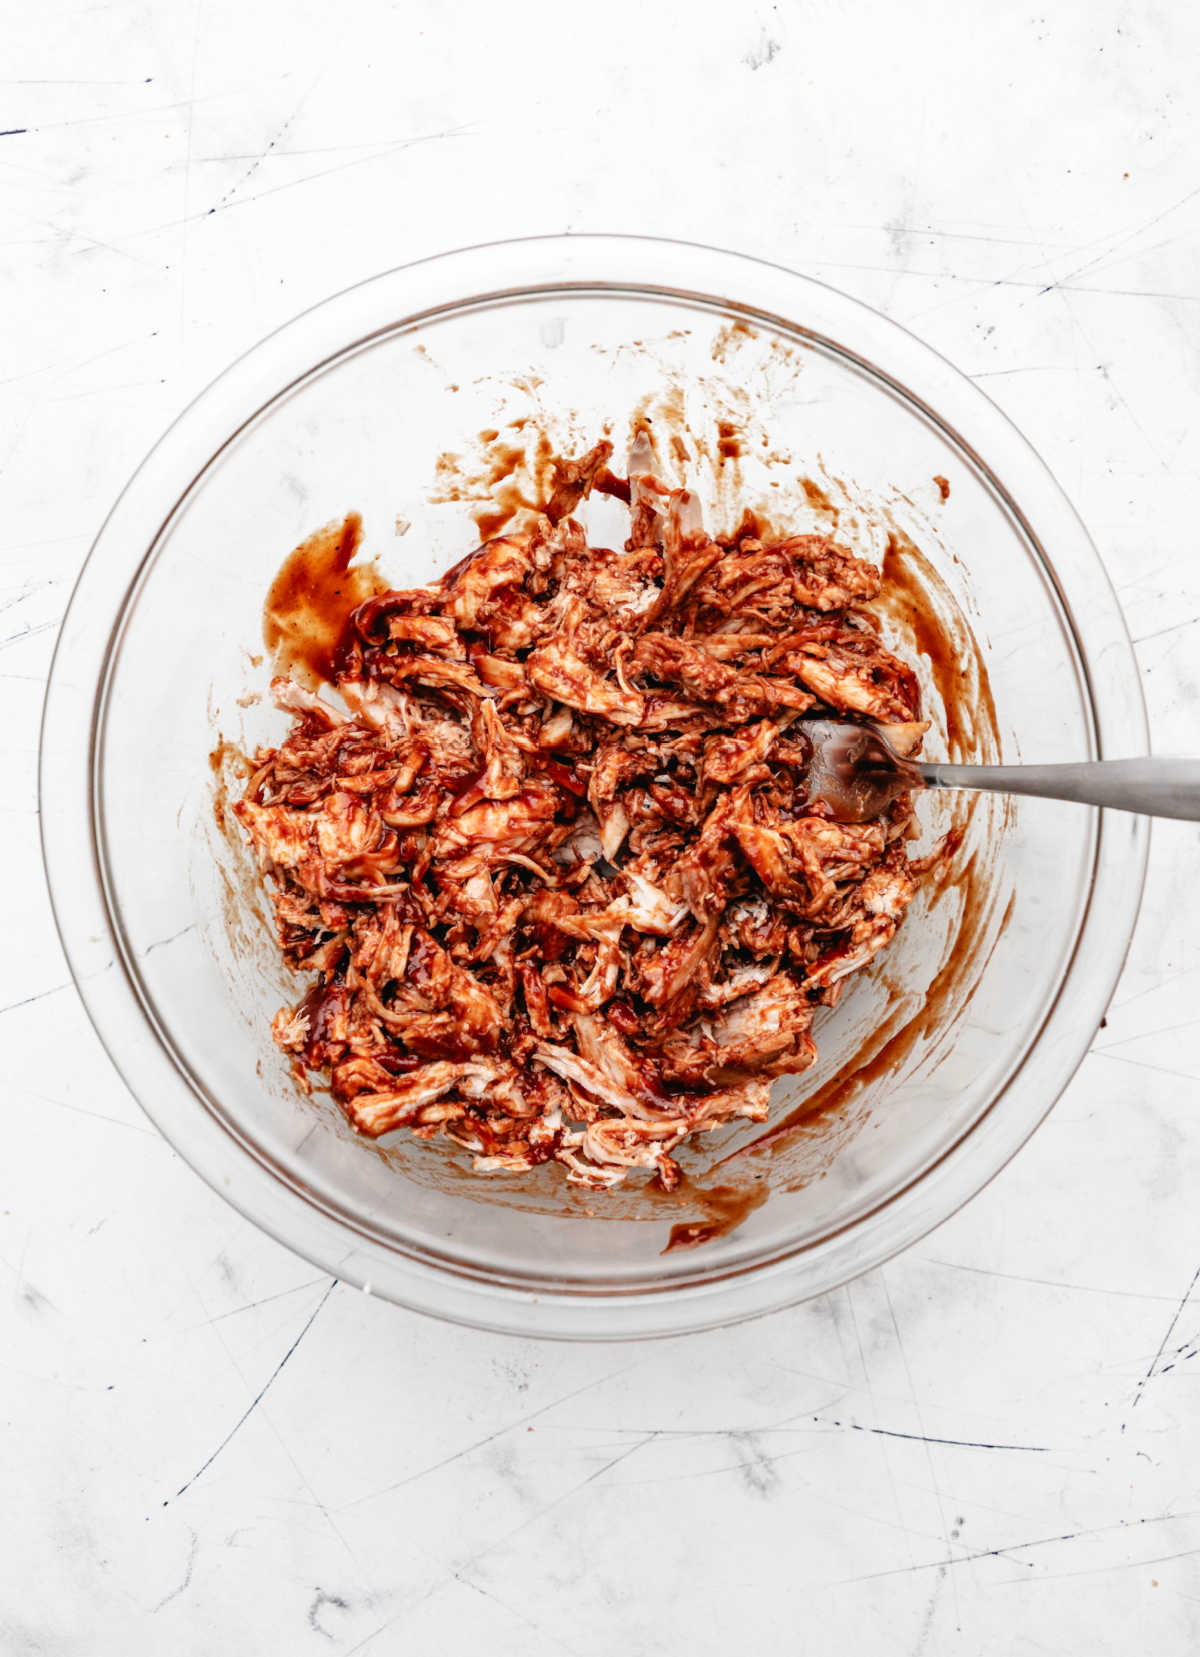 Shredded barbecue chicken in a glass mixing bowl. 